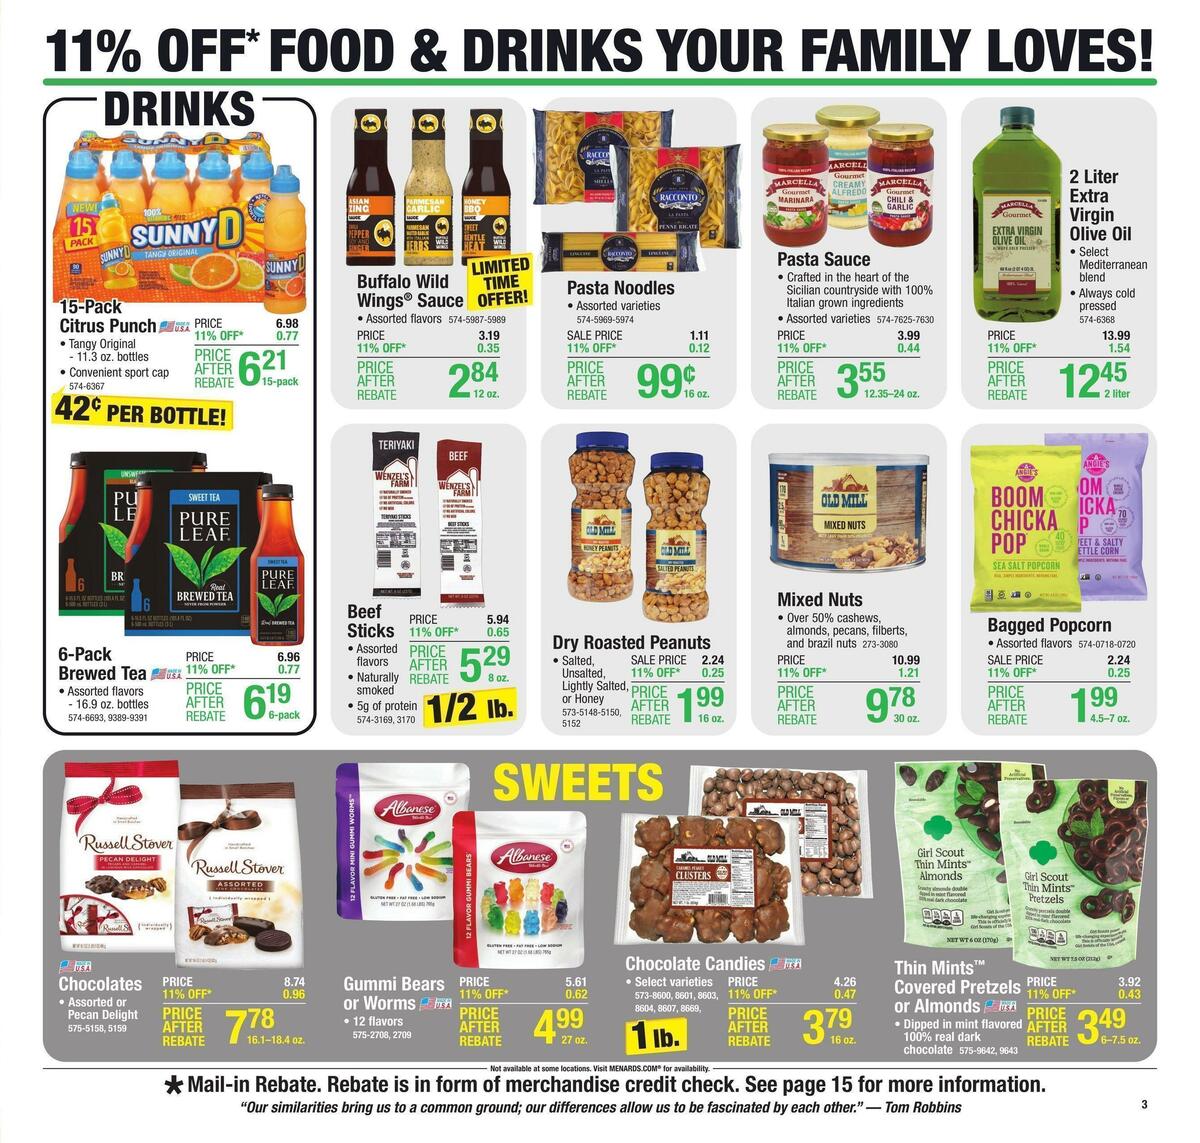 Menards Weekly Ad from October 5